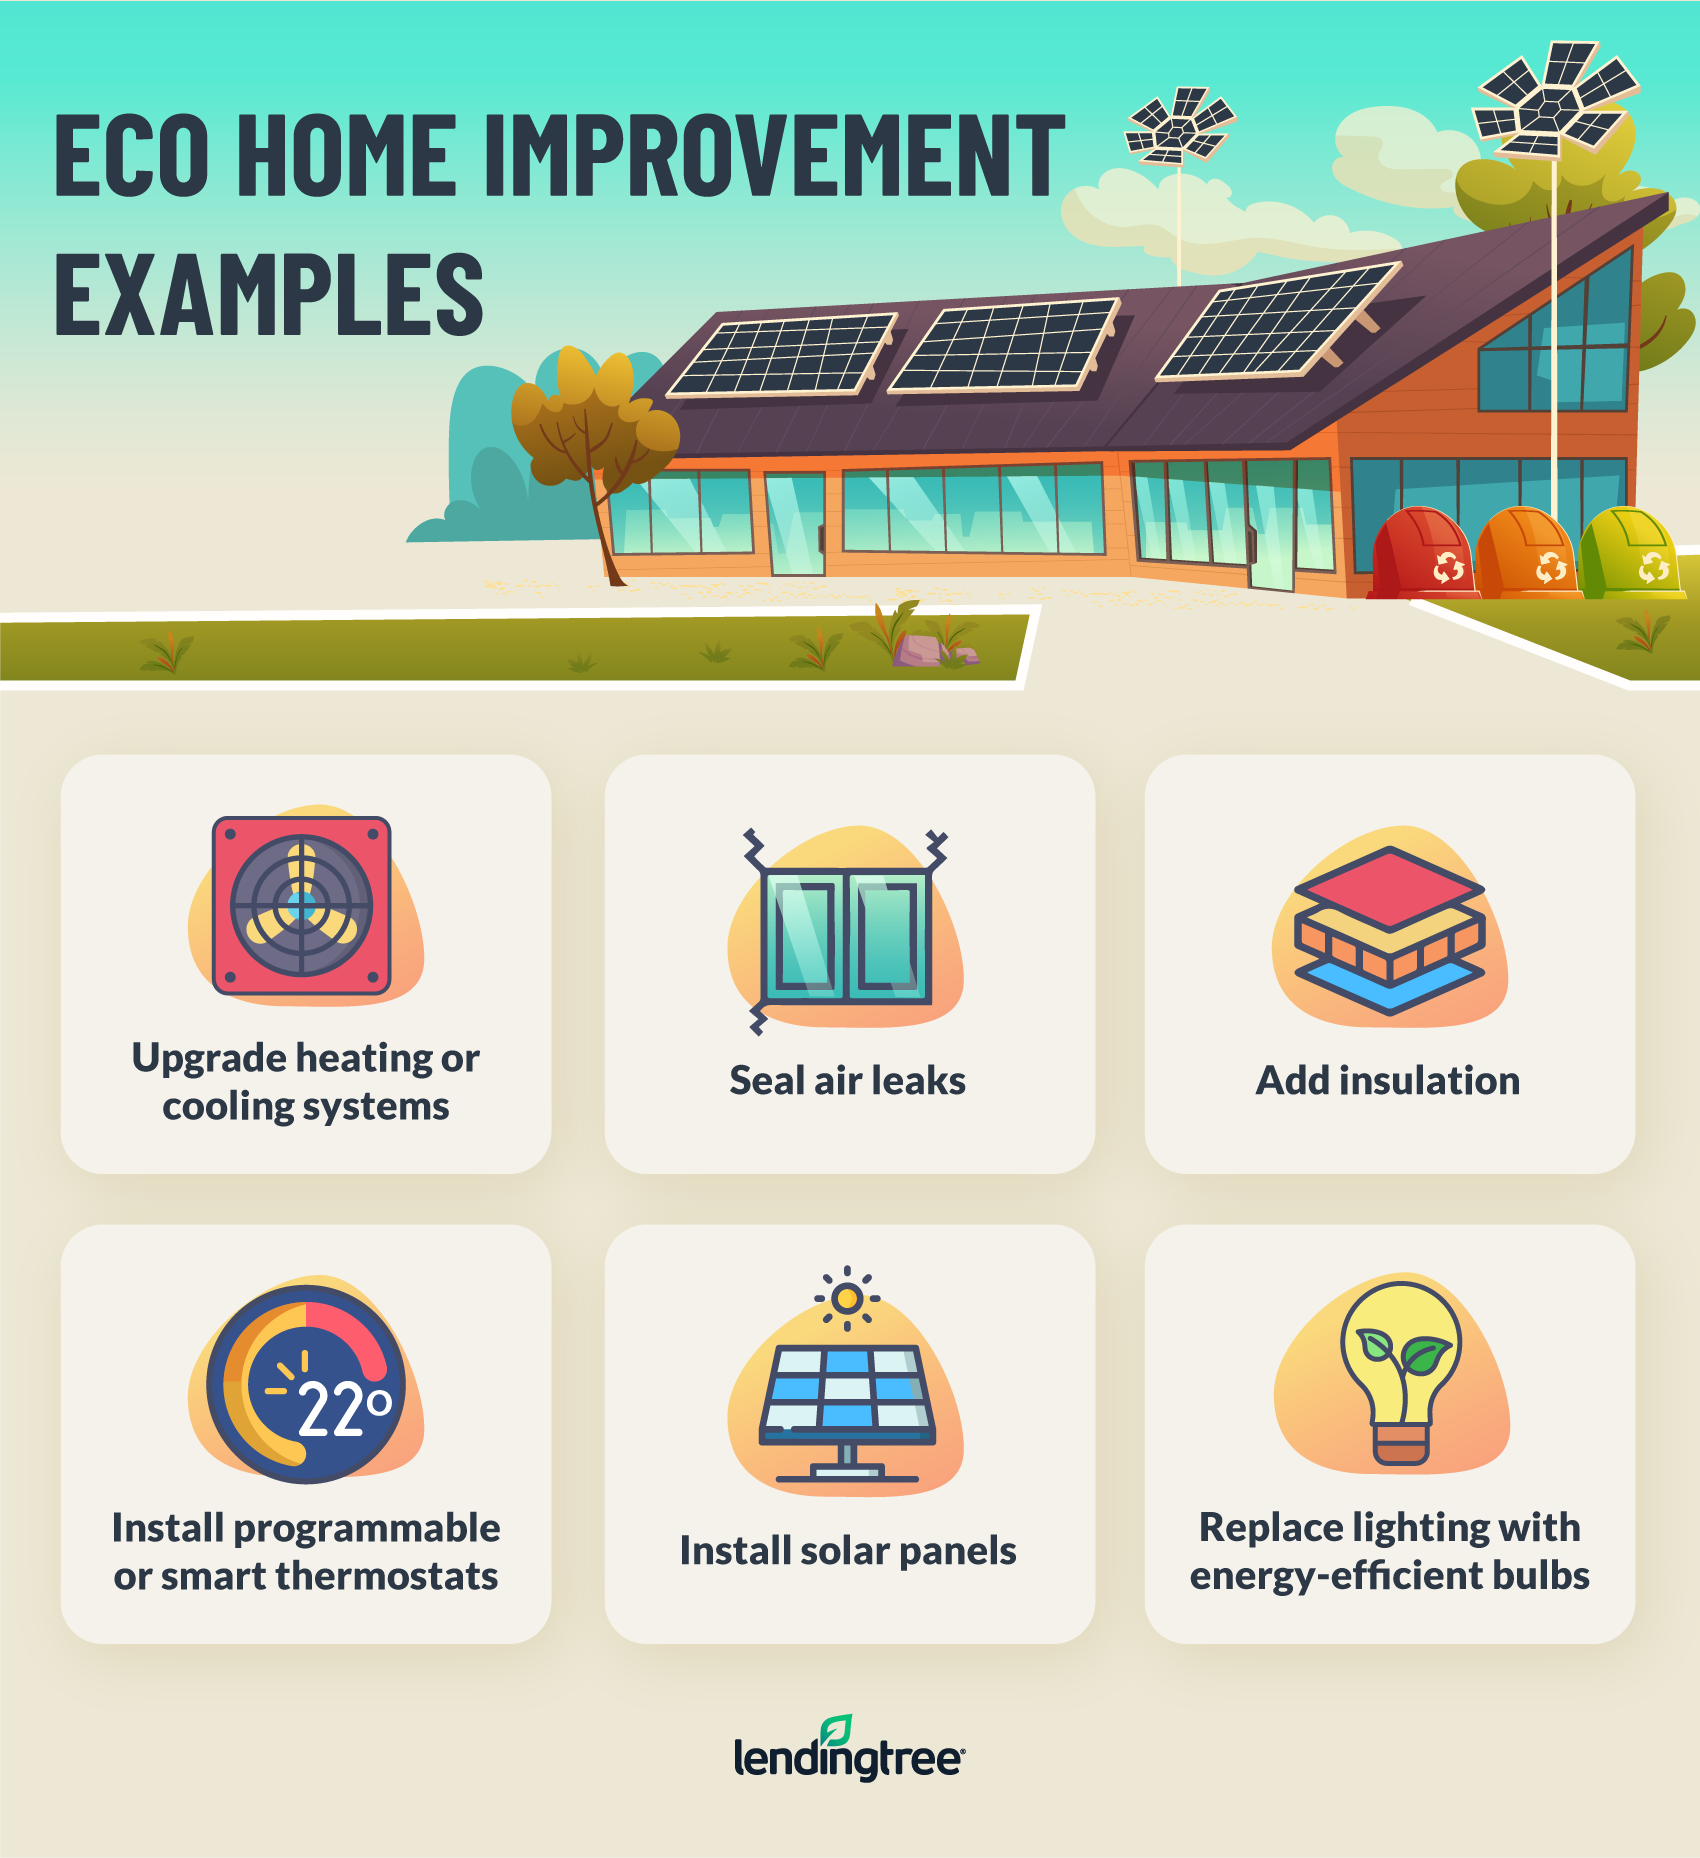 Finance Your Eco Home Improvements